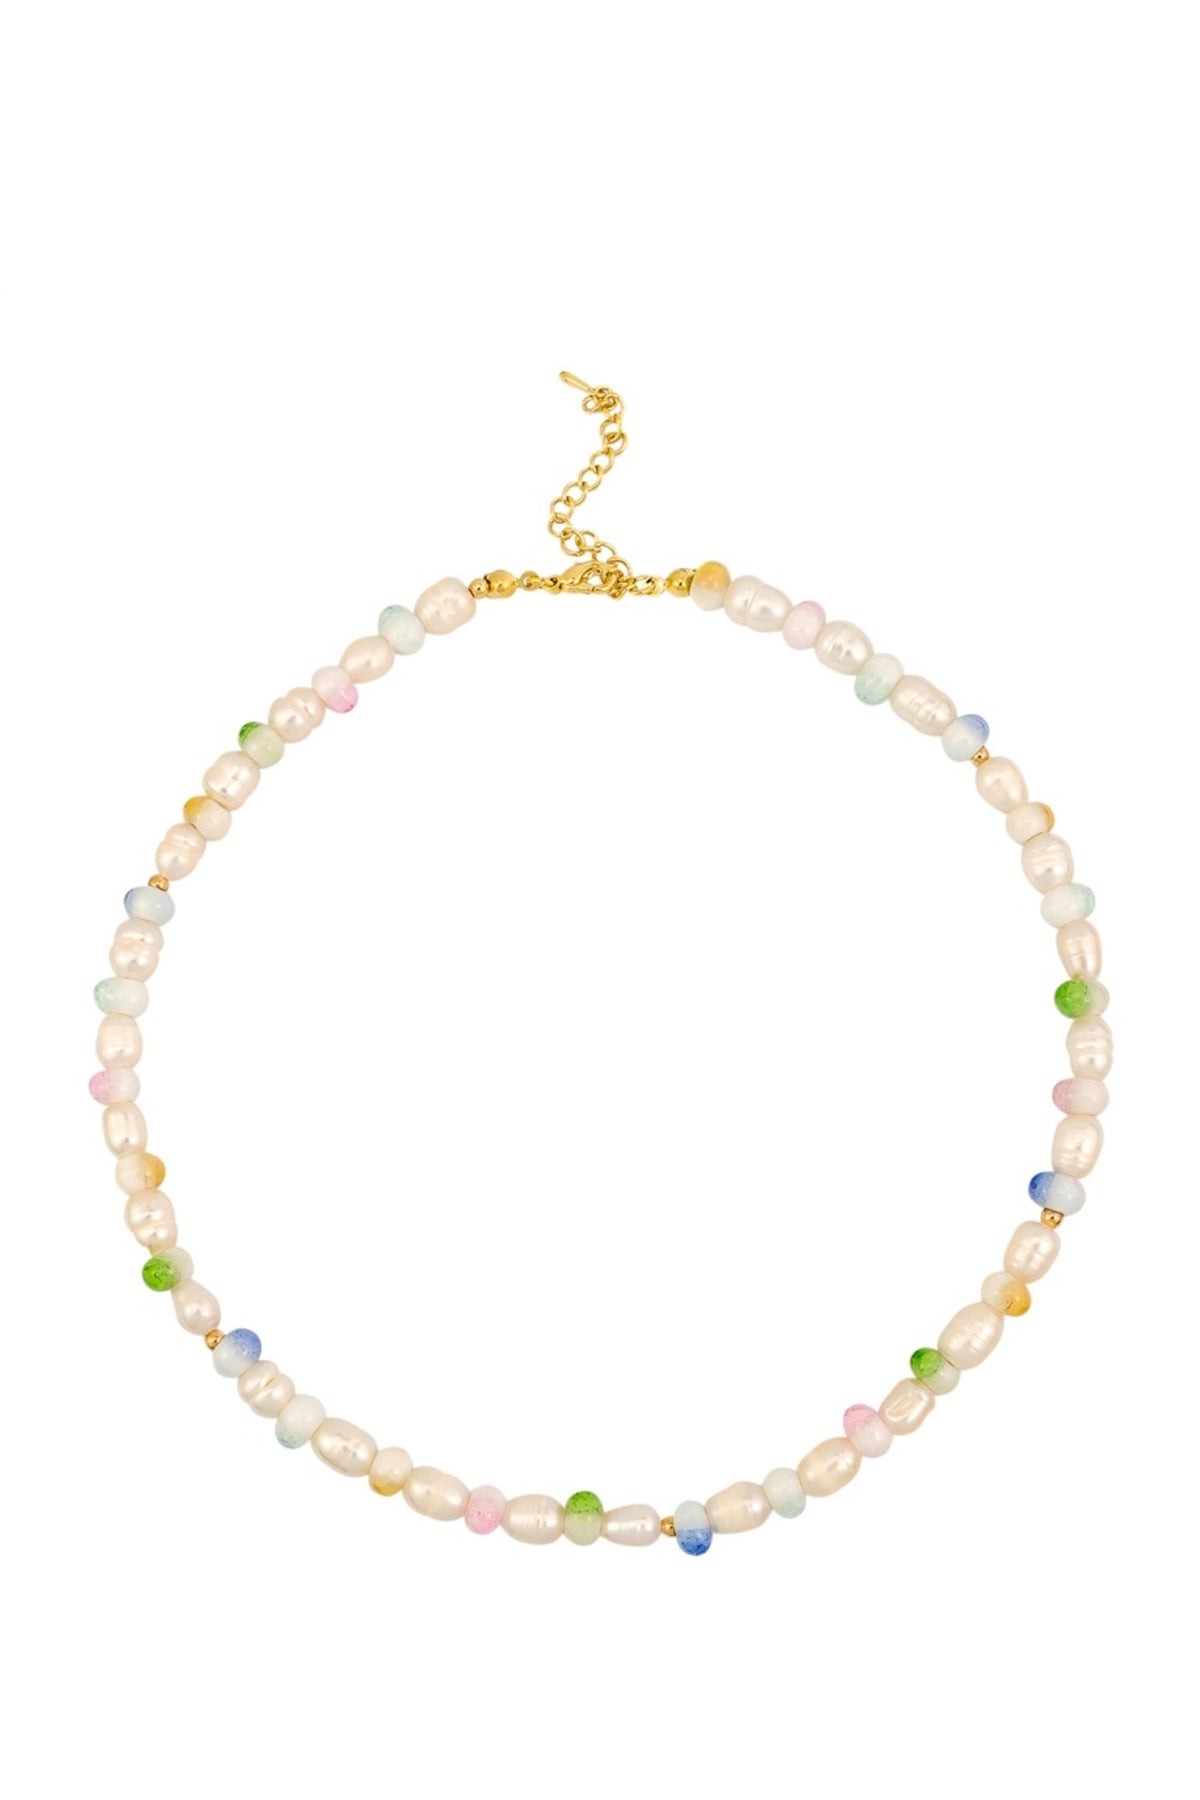 Pastel Freshwater Pearls & Bead Necklace